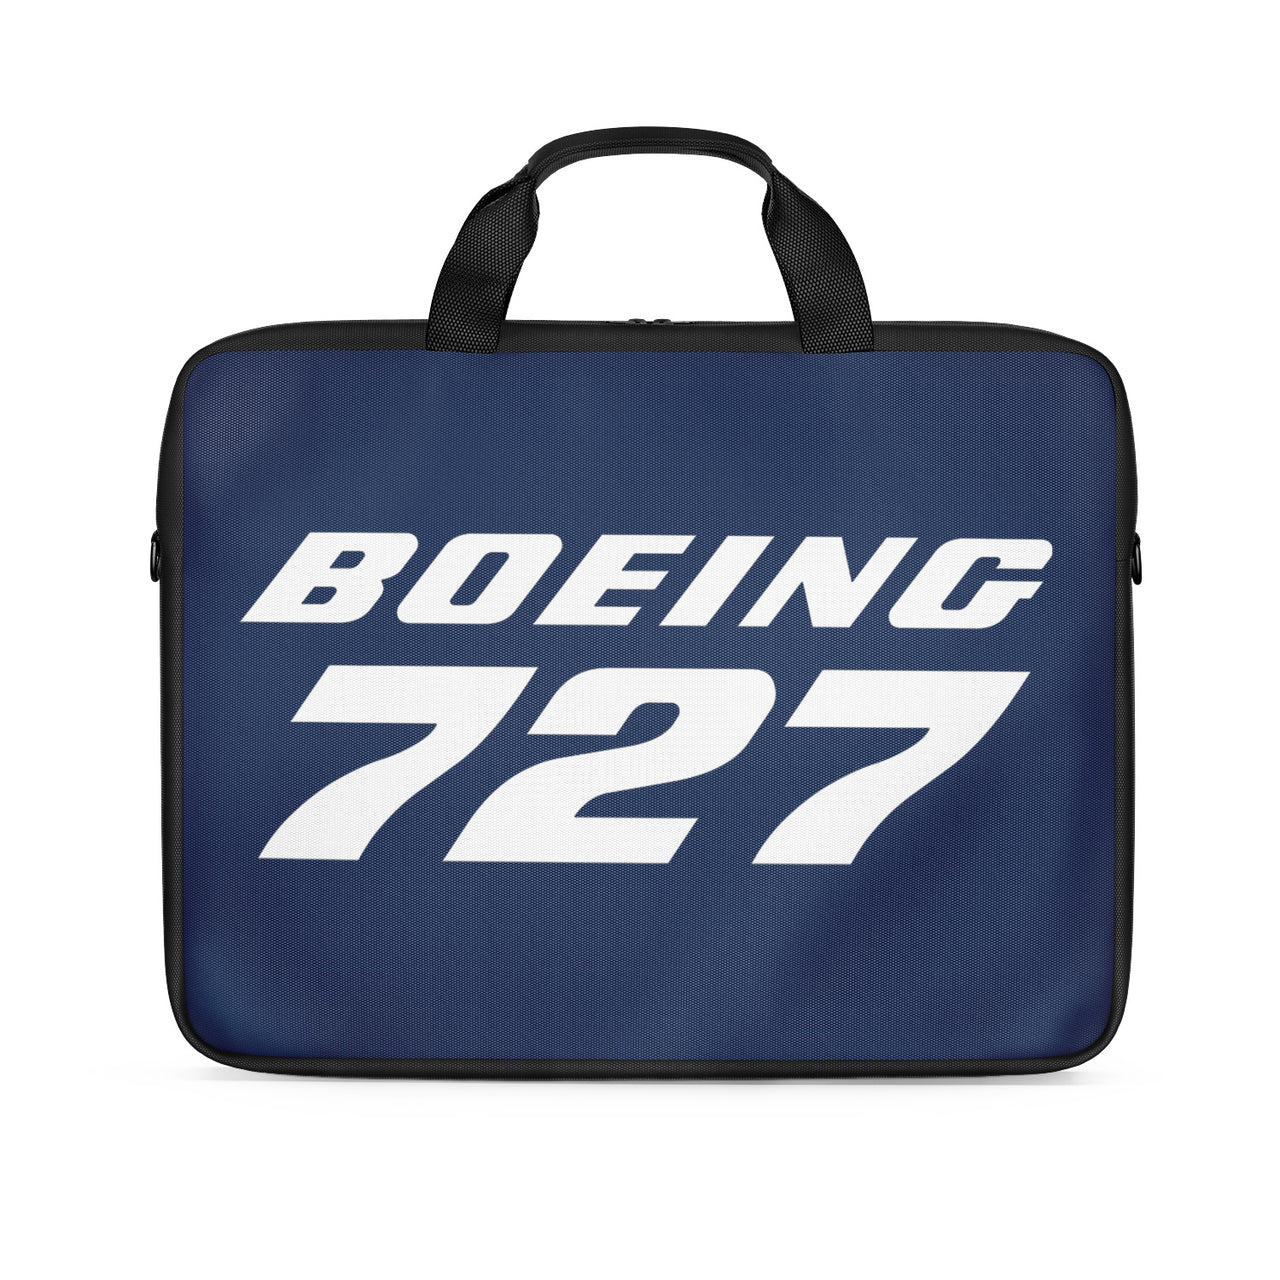 Boeing 727 & Text Designed Laptop & Tablet Bags